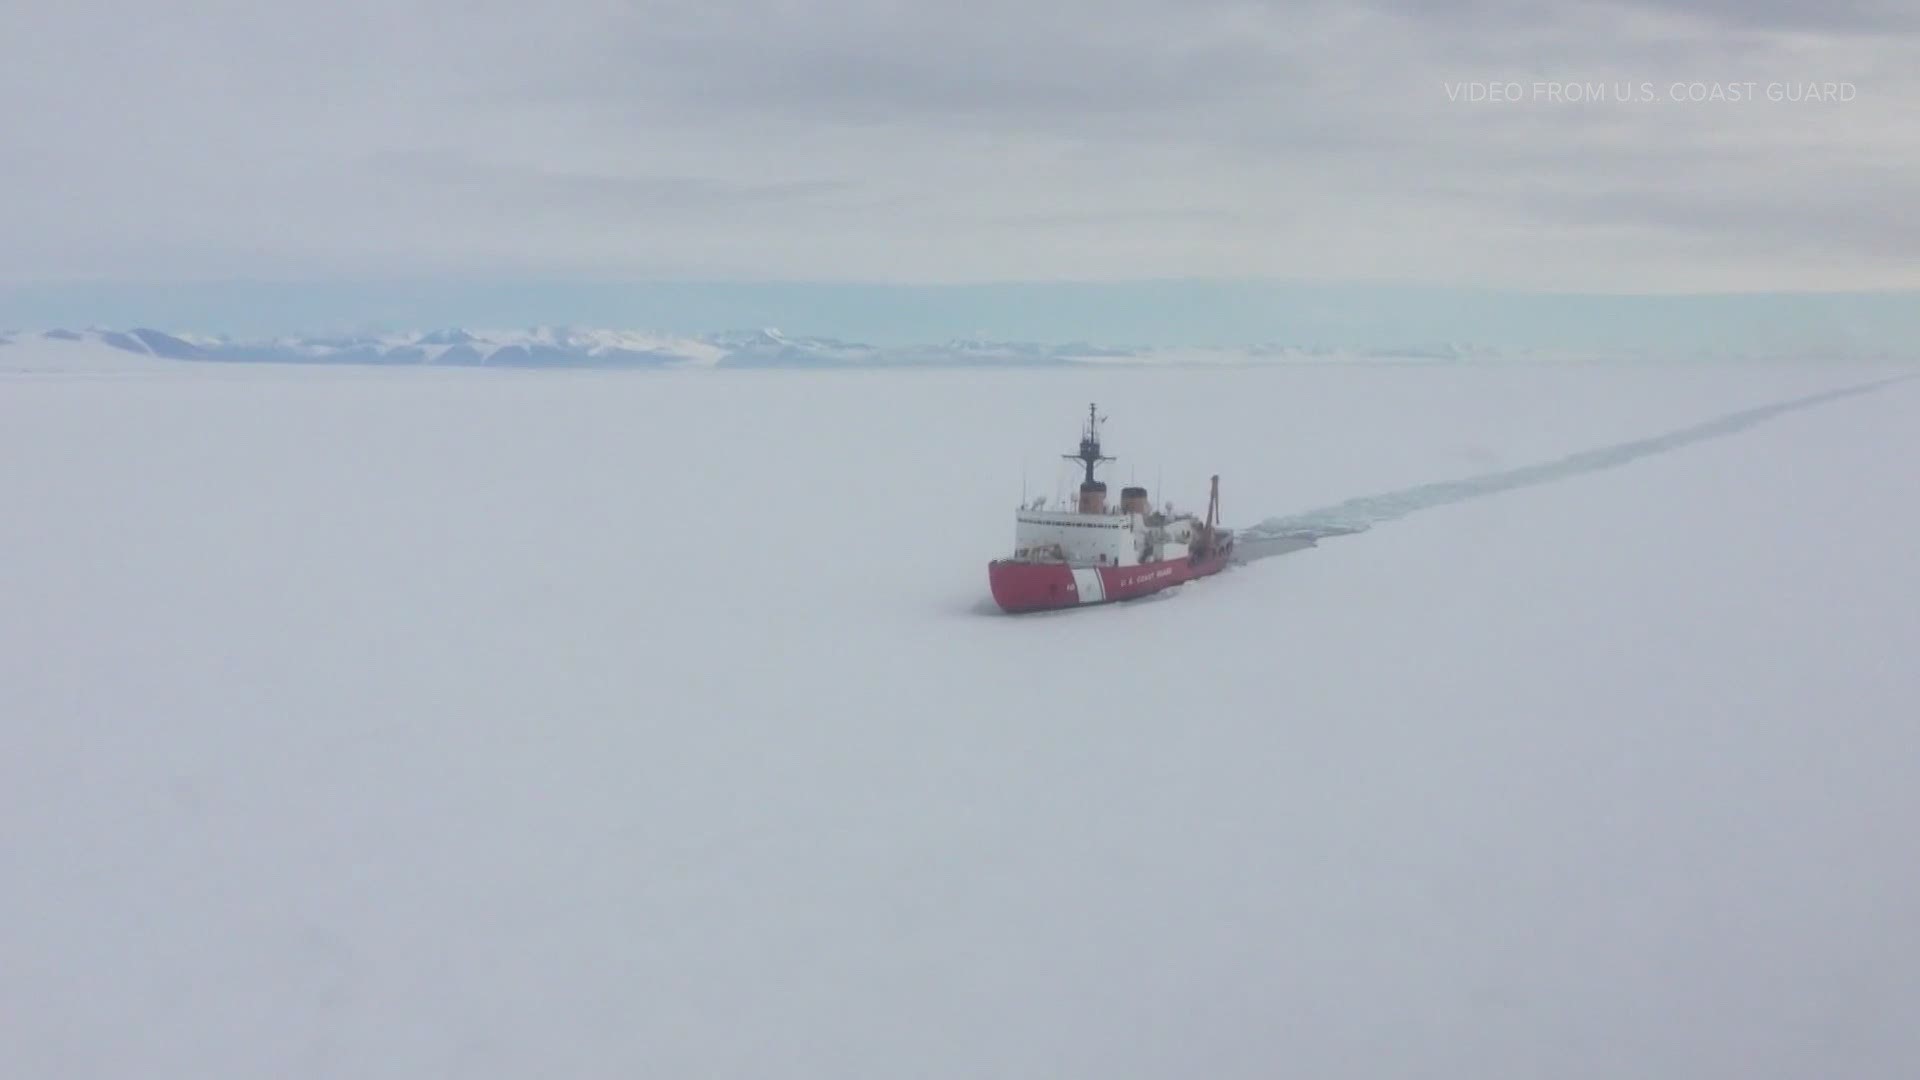 The expansion would make room for three new polar ice cutters as the Coast Guard aims to expand its presence in the Arctic.